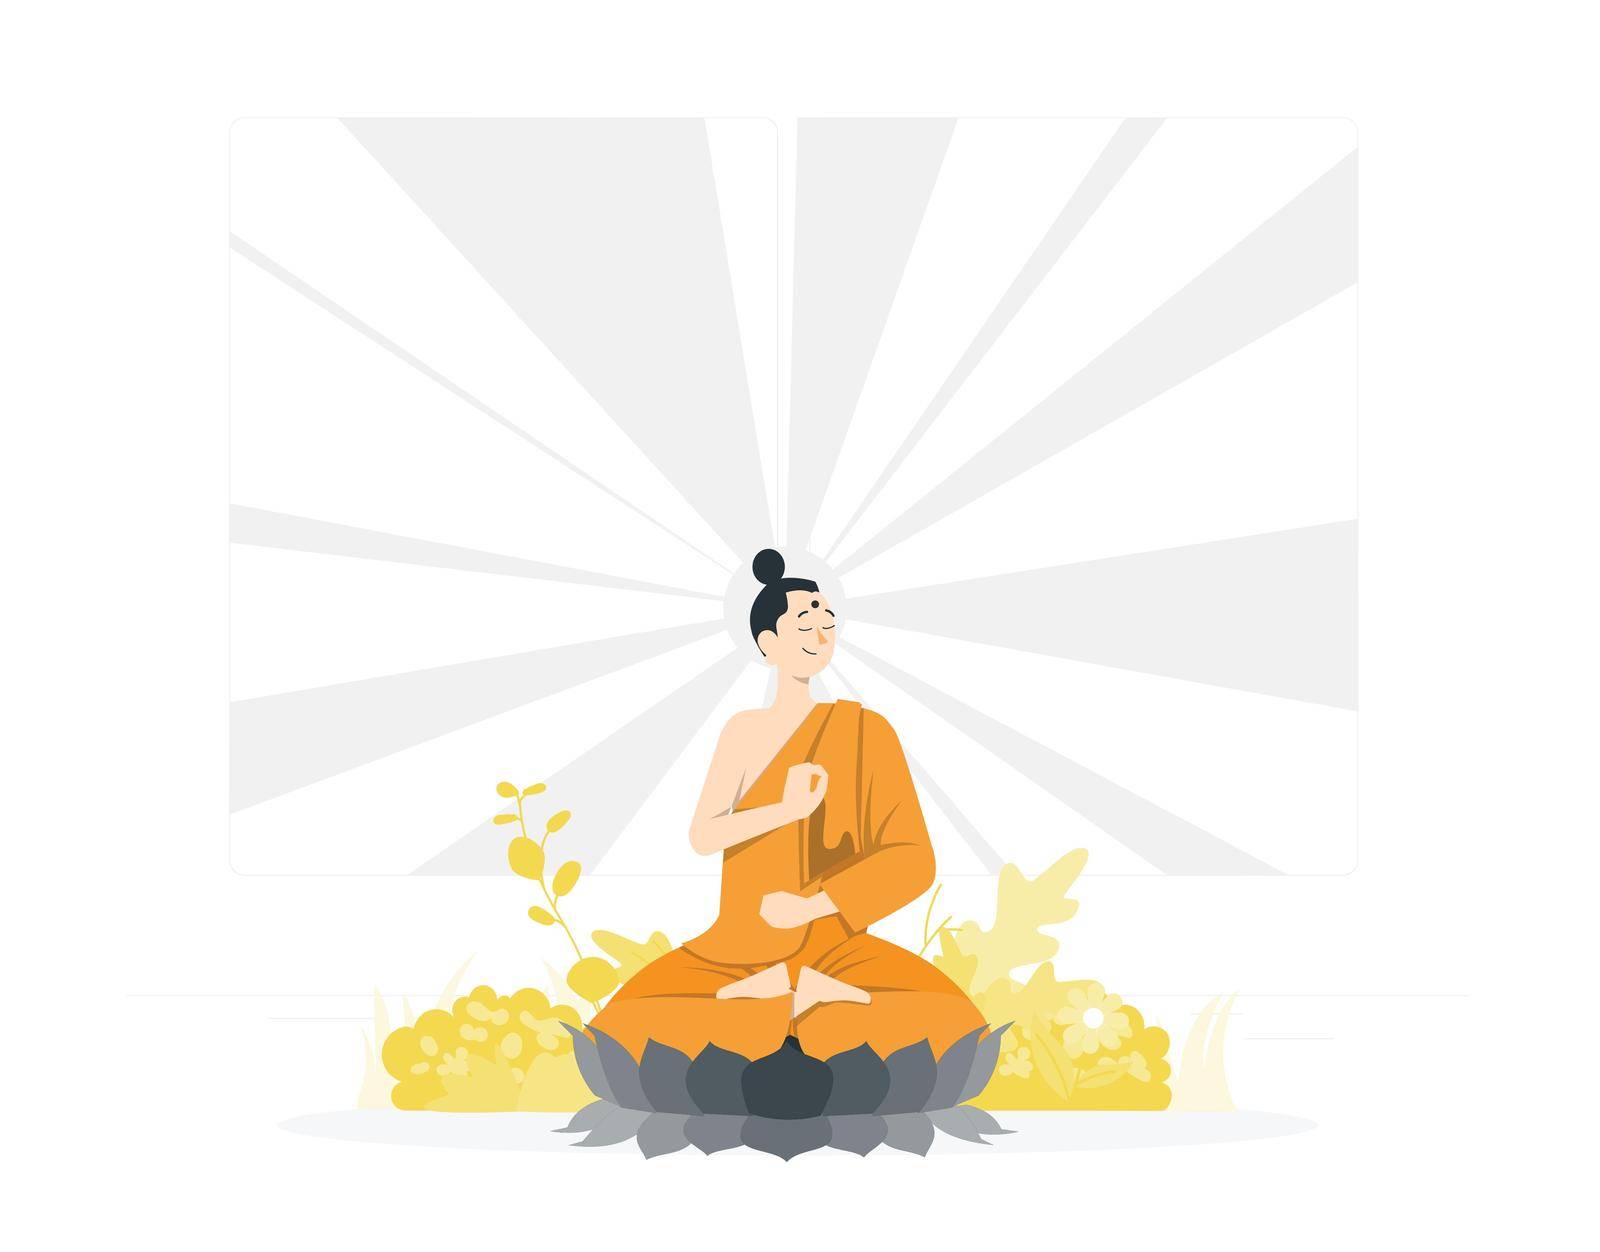 Happy Vesak Day, Buddha Purnima wishes greetings with buddha and lotus illustration. Can be used for poster, banner, logo, background, greetings, print design, festive elements. vector illustration.